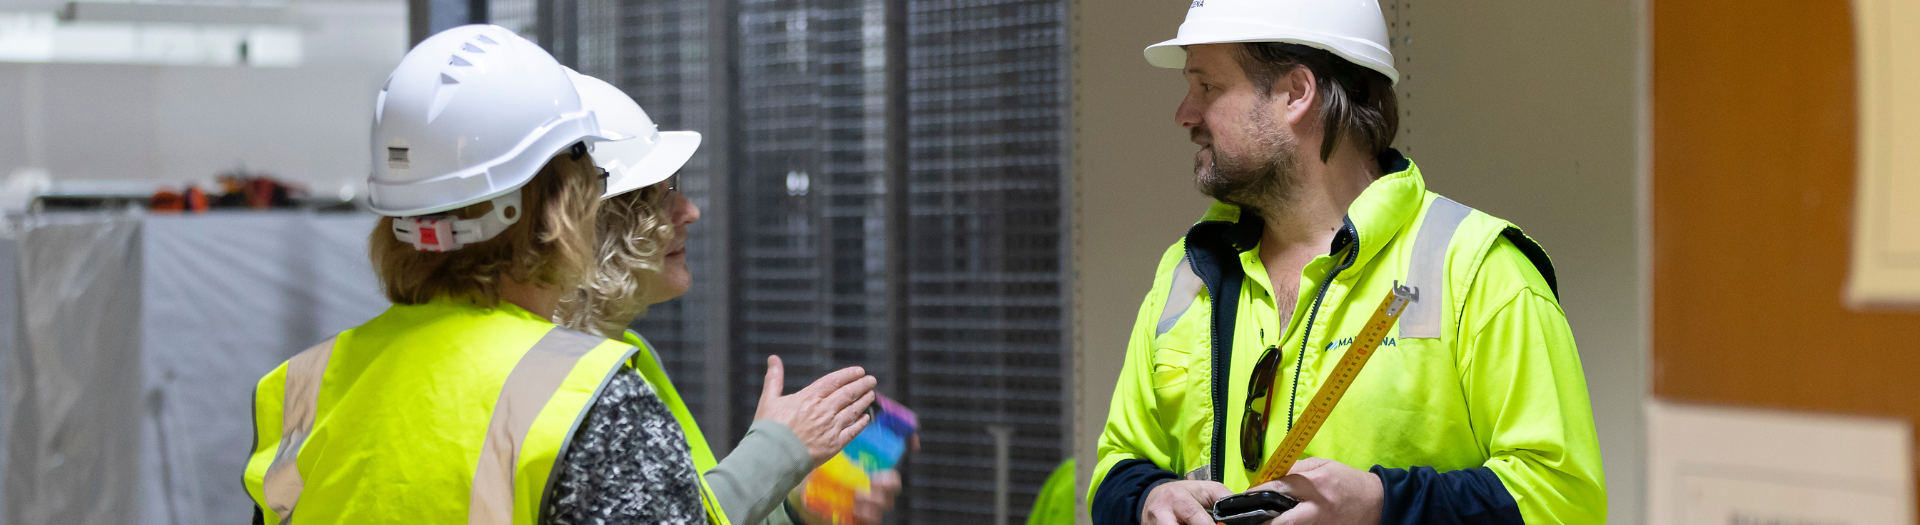 Two women and one man, all wearing high-visibility clothing and hard hats, having a discussion 